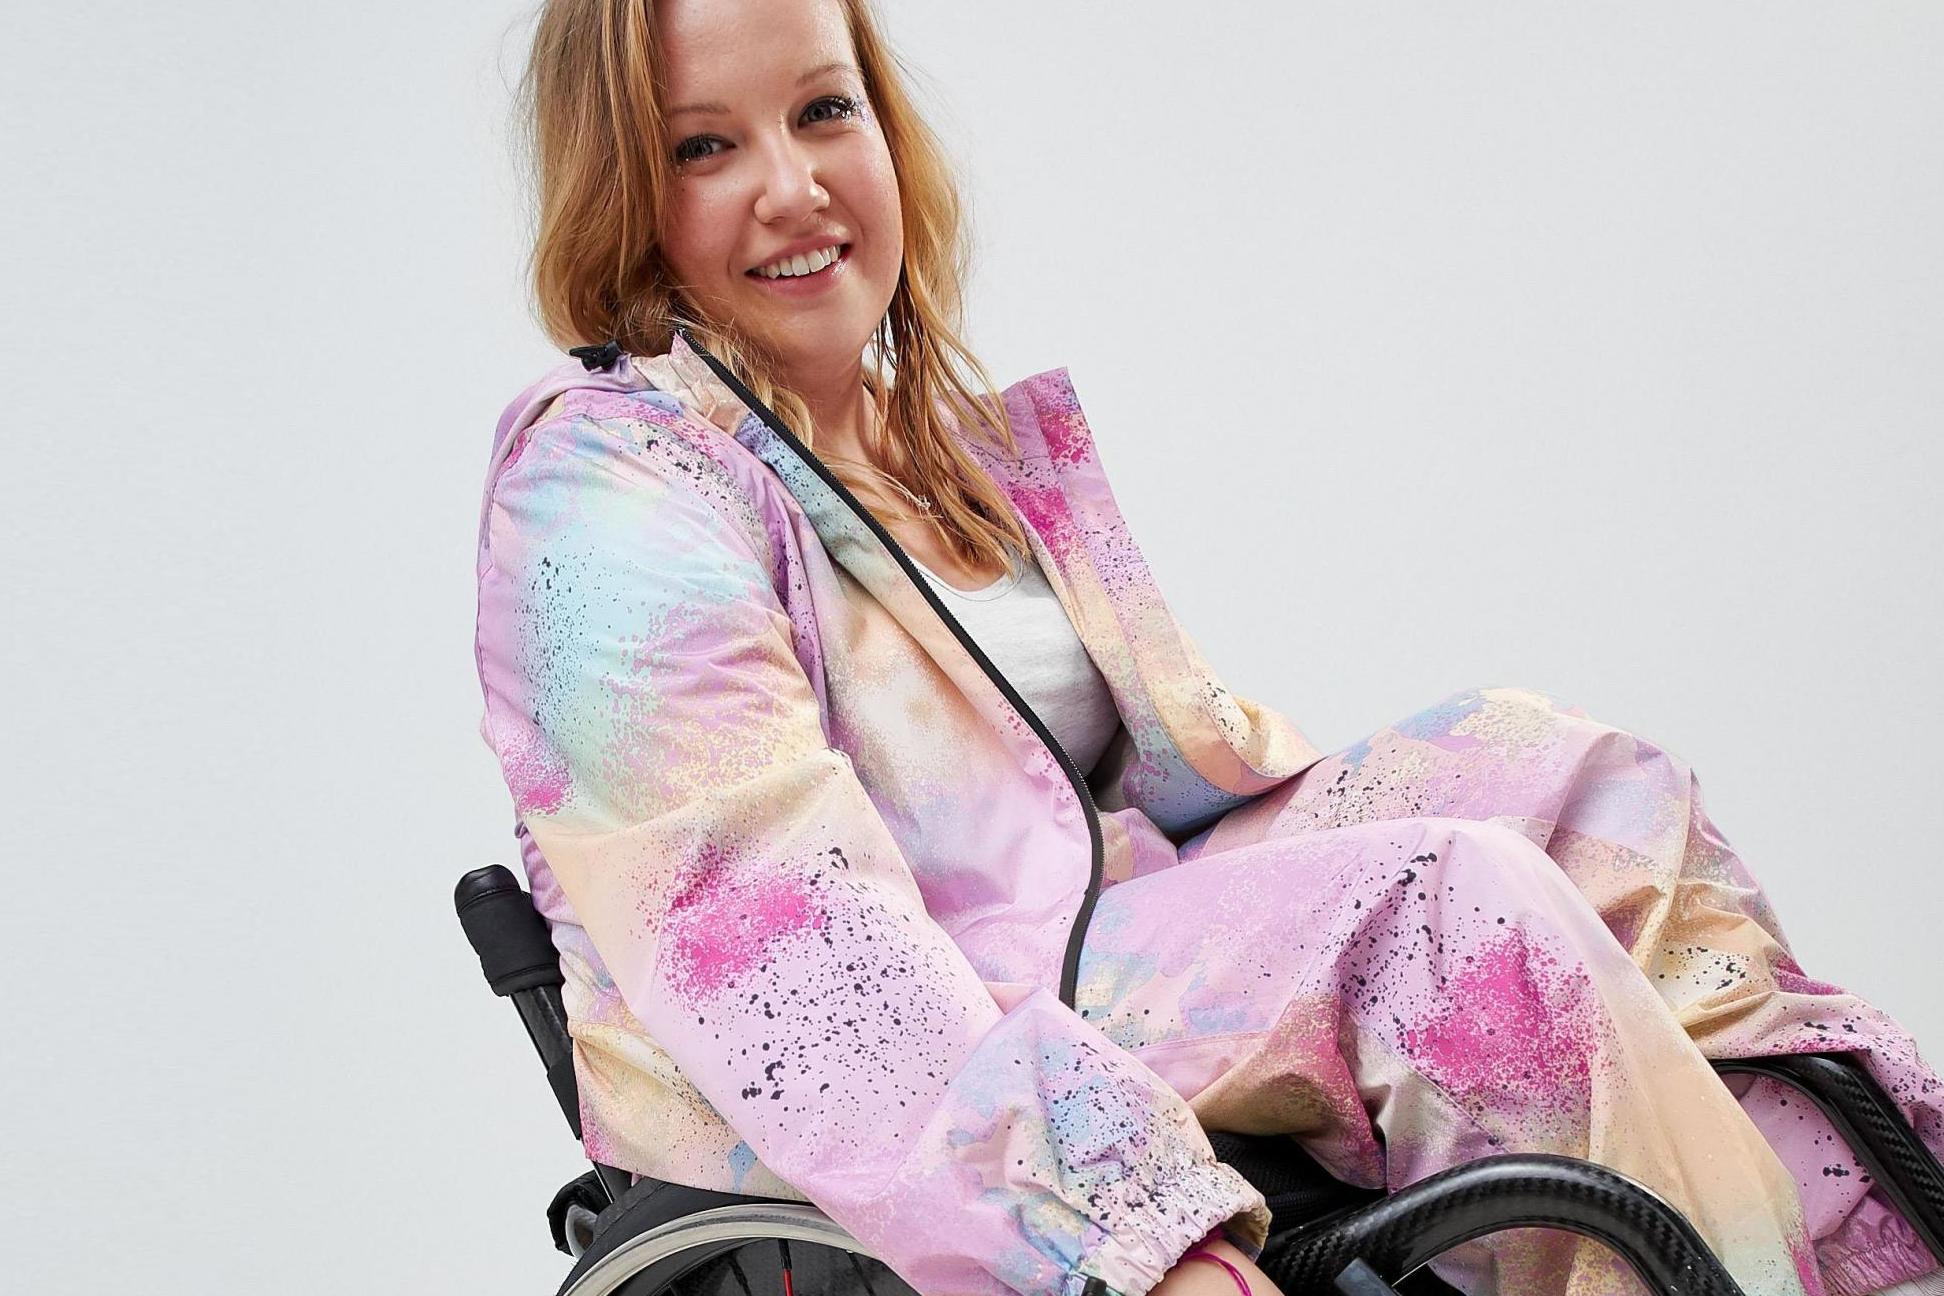 Reporter and Team GB Paralympic athlete Chloe Ball-Hopkins has collaborated with ASOS to make clothing on the site more accessible for people with disabilities (ASOS)